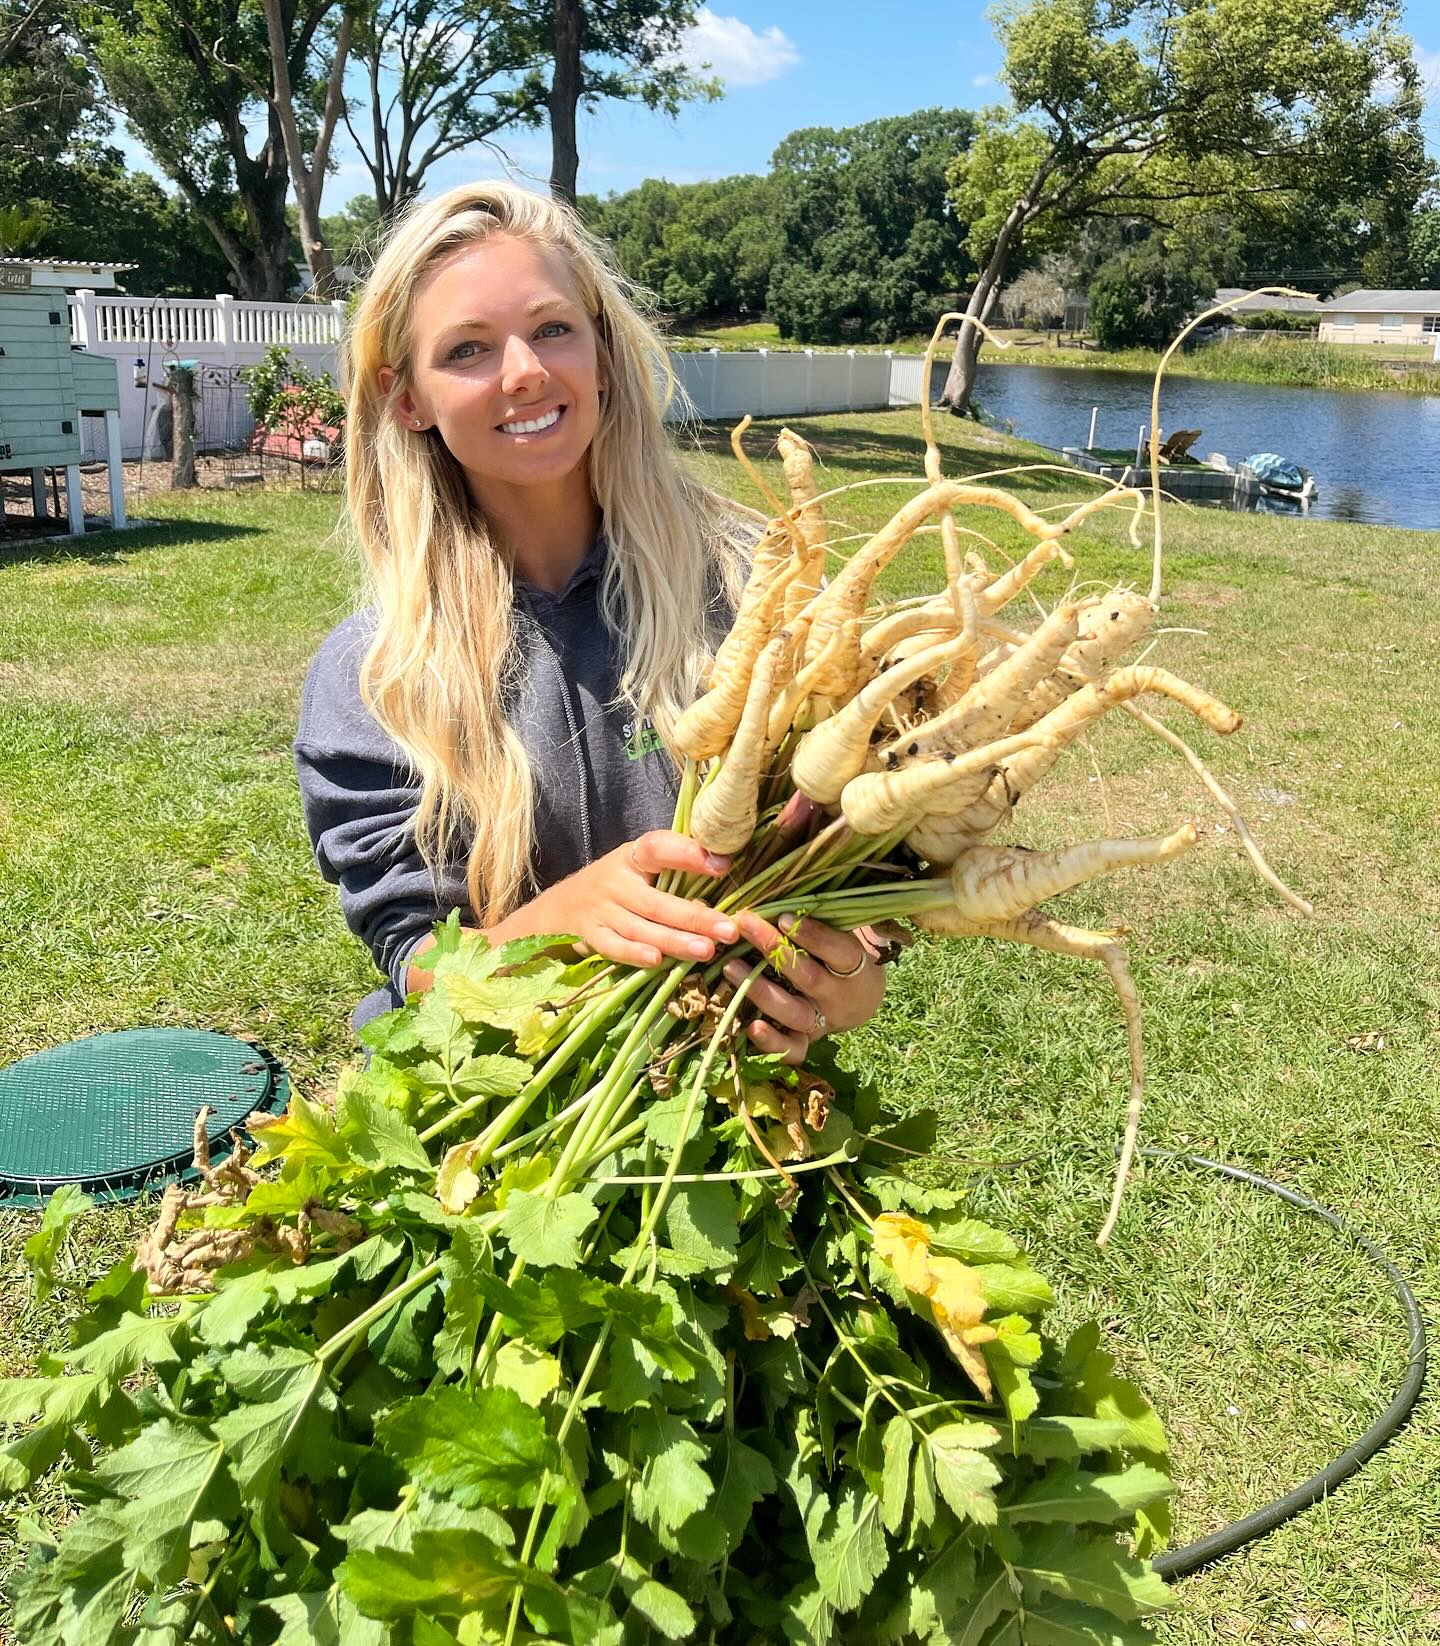 Have you ever tried parsnip ? 🌾 
they look like a carrot and have a sweet nutty flavor. Prepared like mashed potatoes is my favorite and who knew they were so easy to grow. They really loved their full sun & loose sandy soil 🌱 
what’s a favorite way to prepare parsnip I need to try next?? 👇🏼 #homegrown #parsnip #backyard #homestead #igroceryshopinmygarden